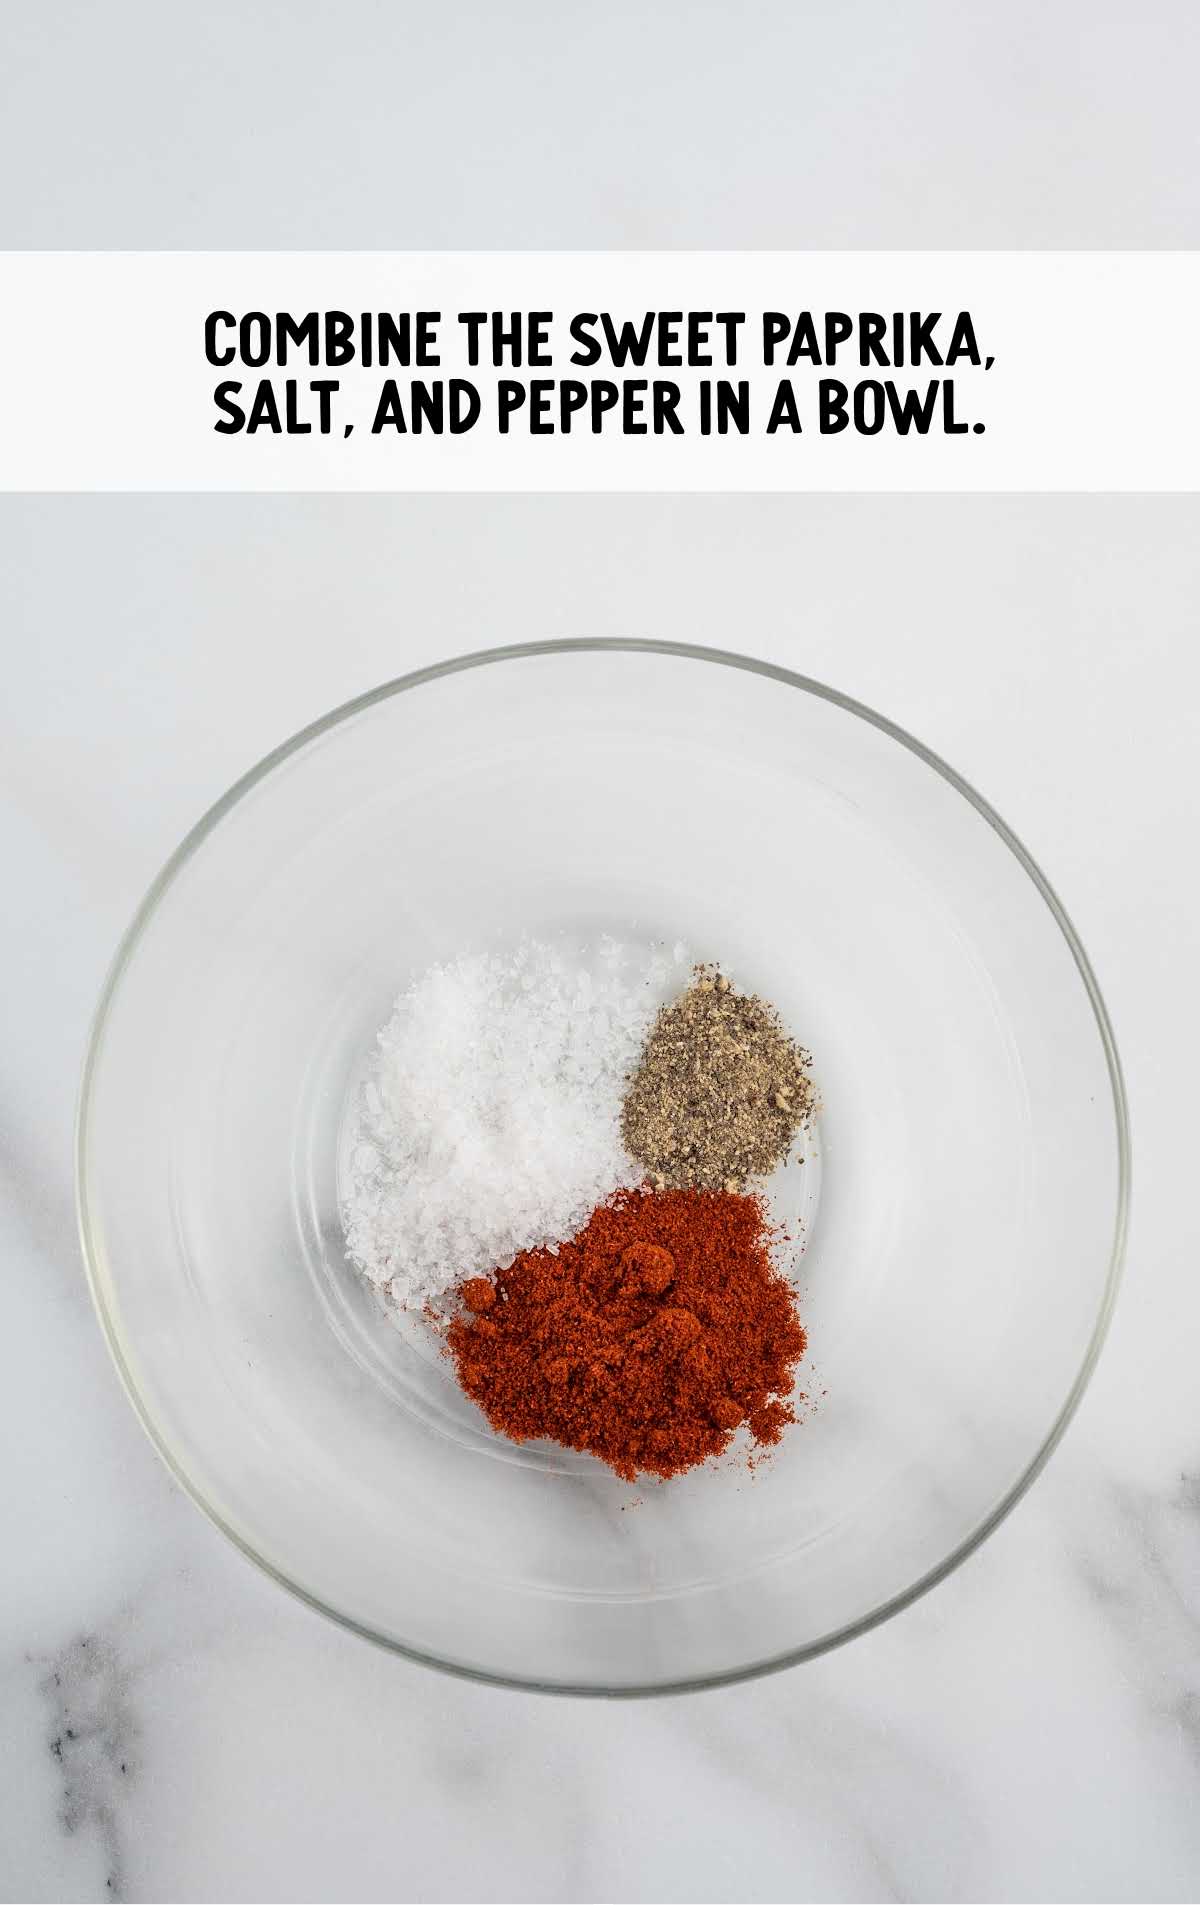 sweet paprika, salt, and pepper combined in a bowl